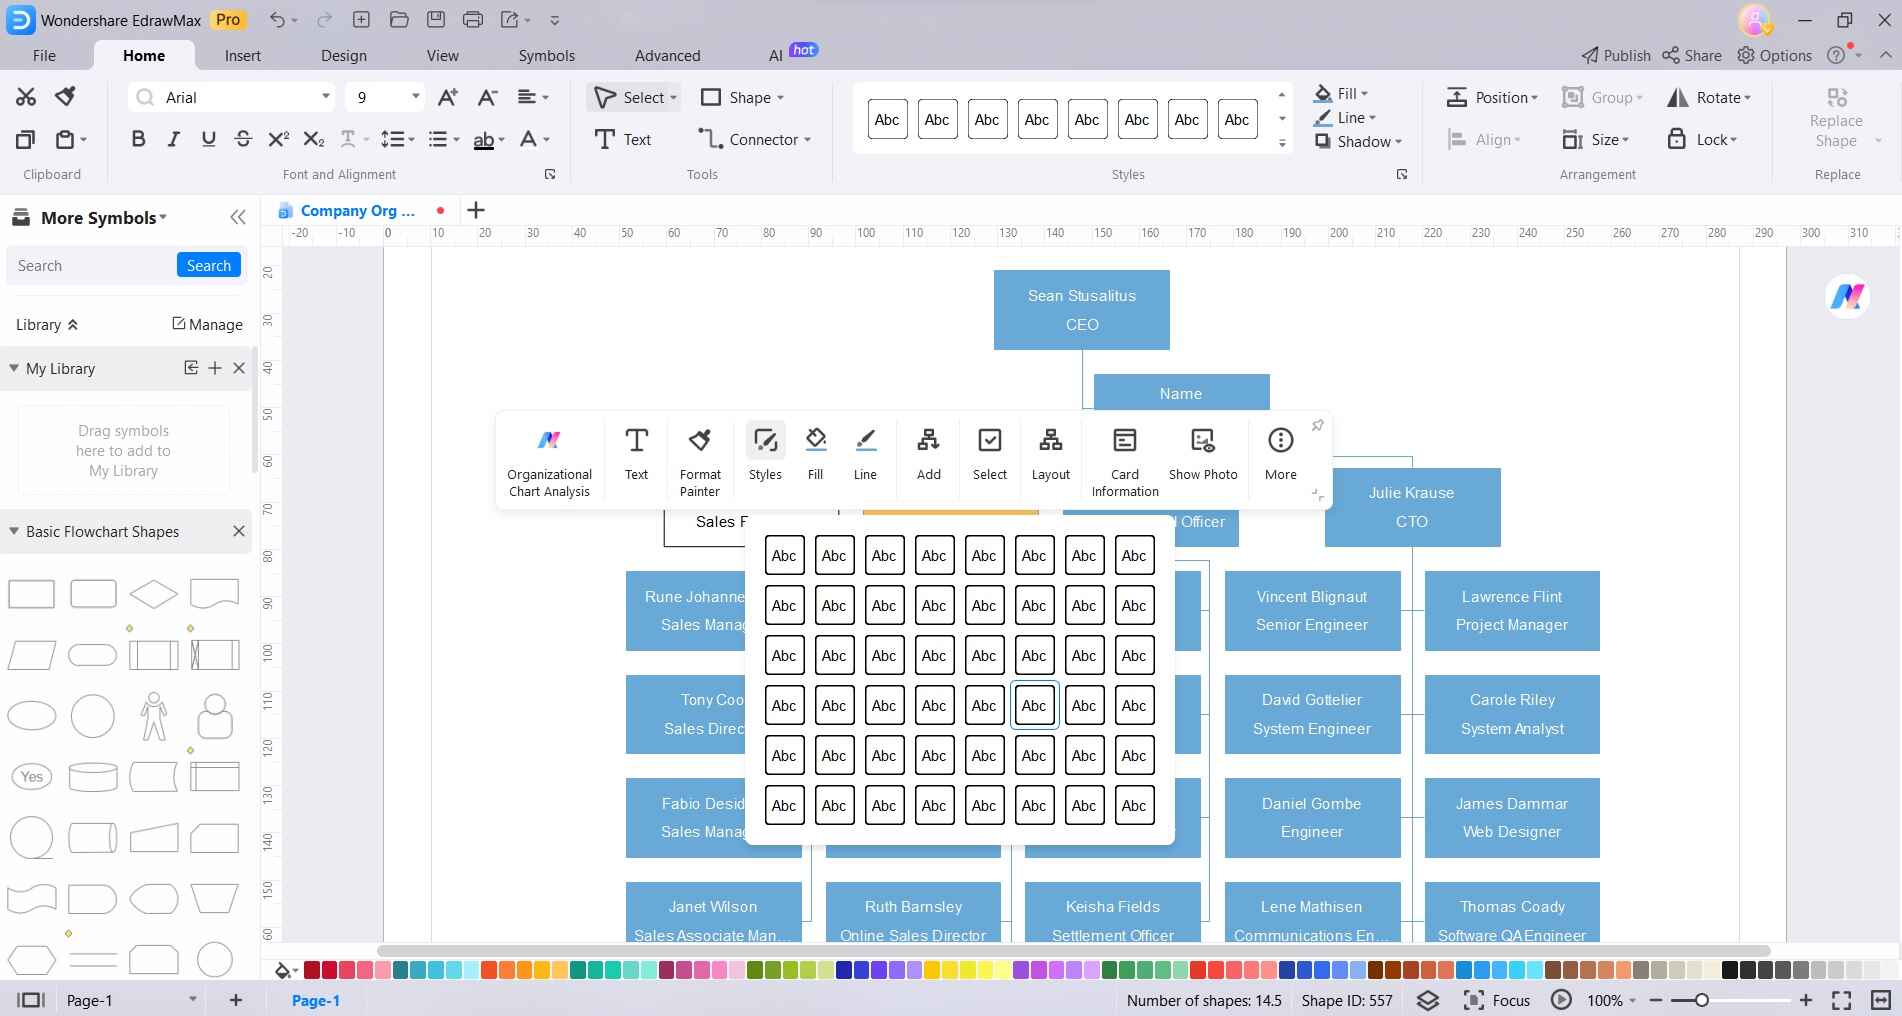 format color style of org chart in edrawmax